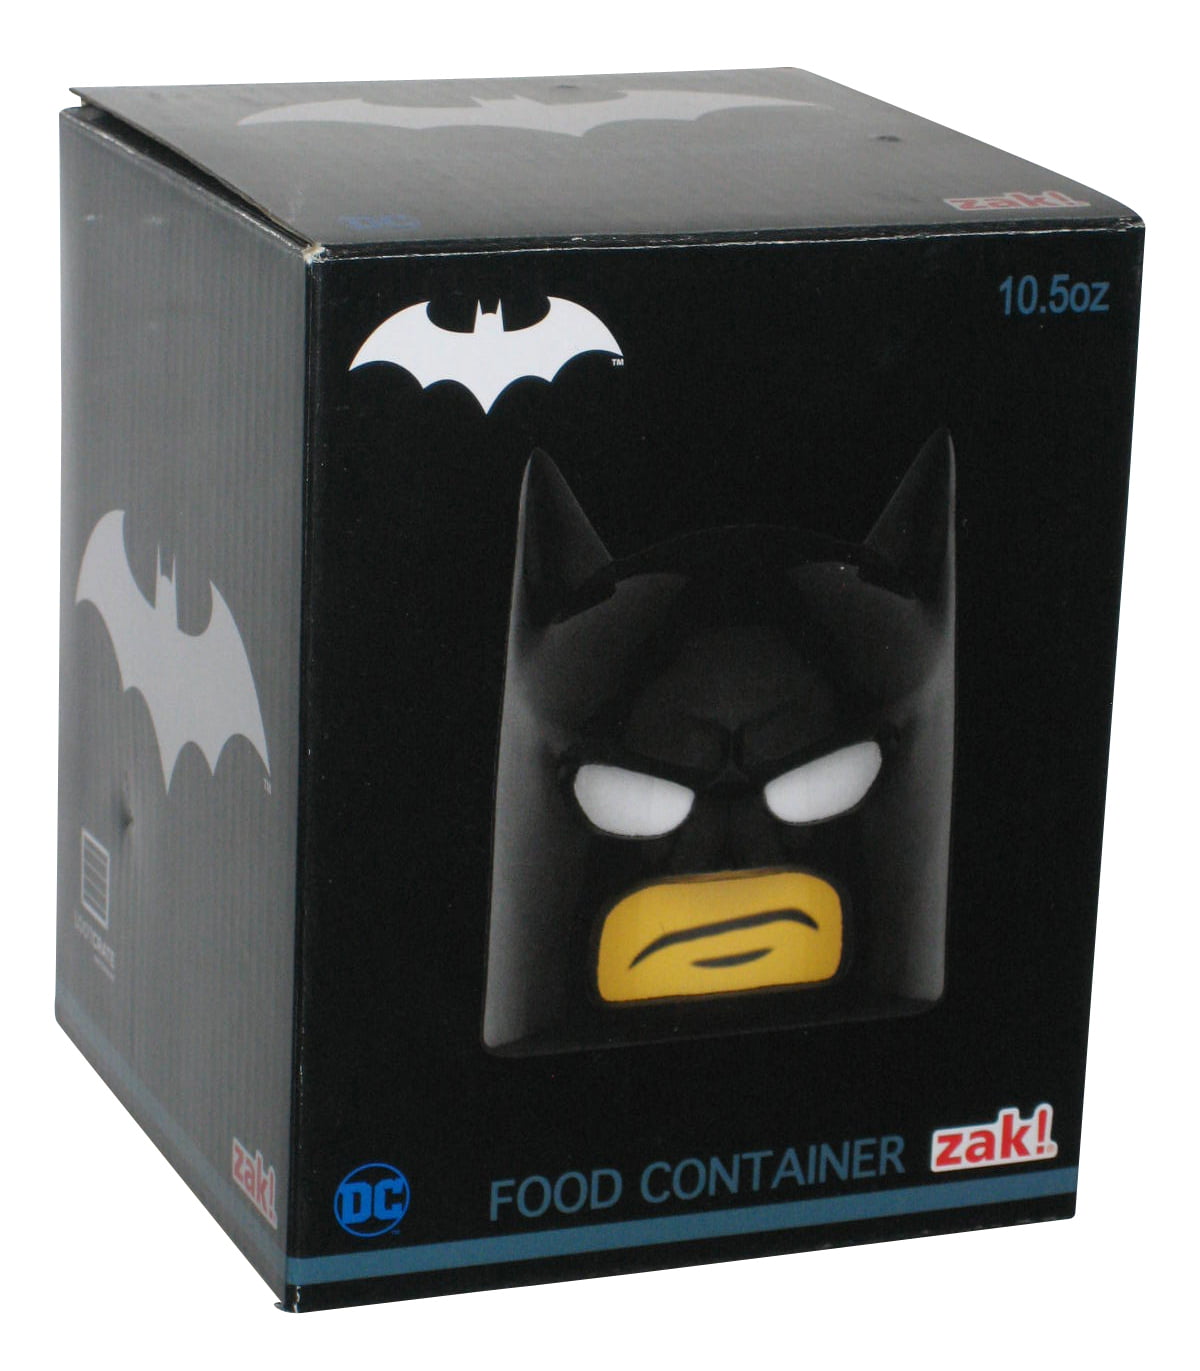 Lego Batman Food Container Loot Crate DC Zak 2017 for sale online 